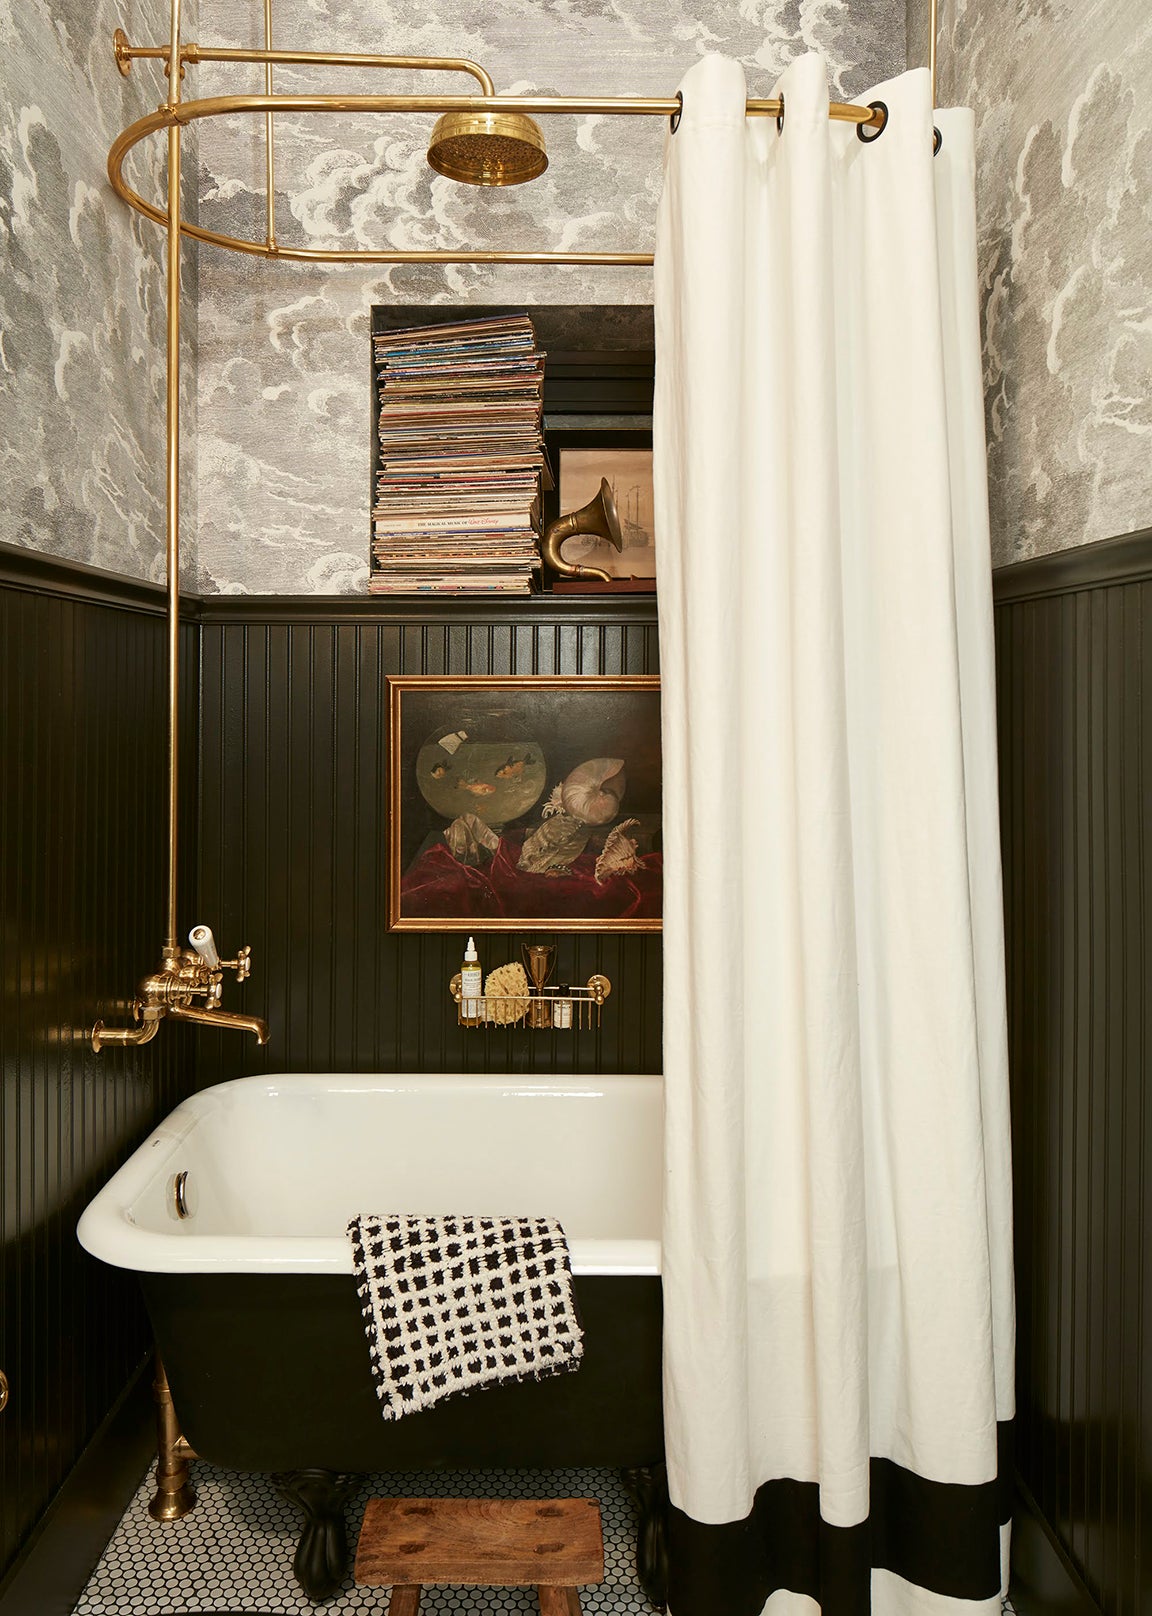 Bathroom with dark wainscoting and hanging painting